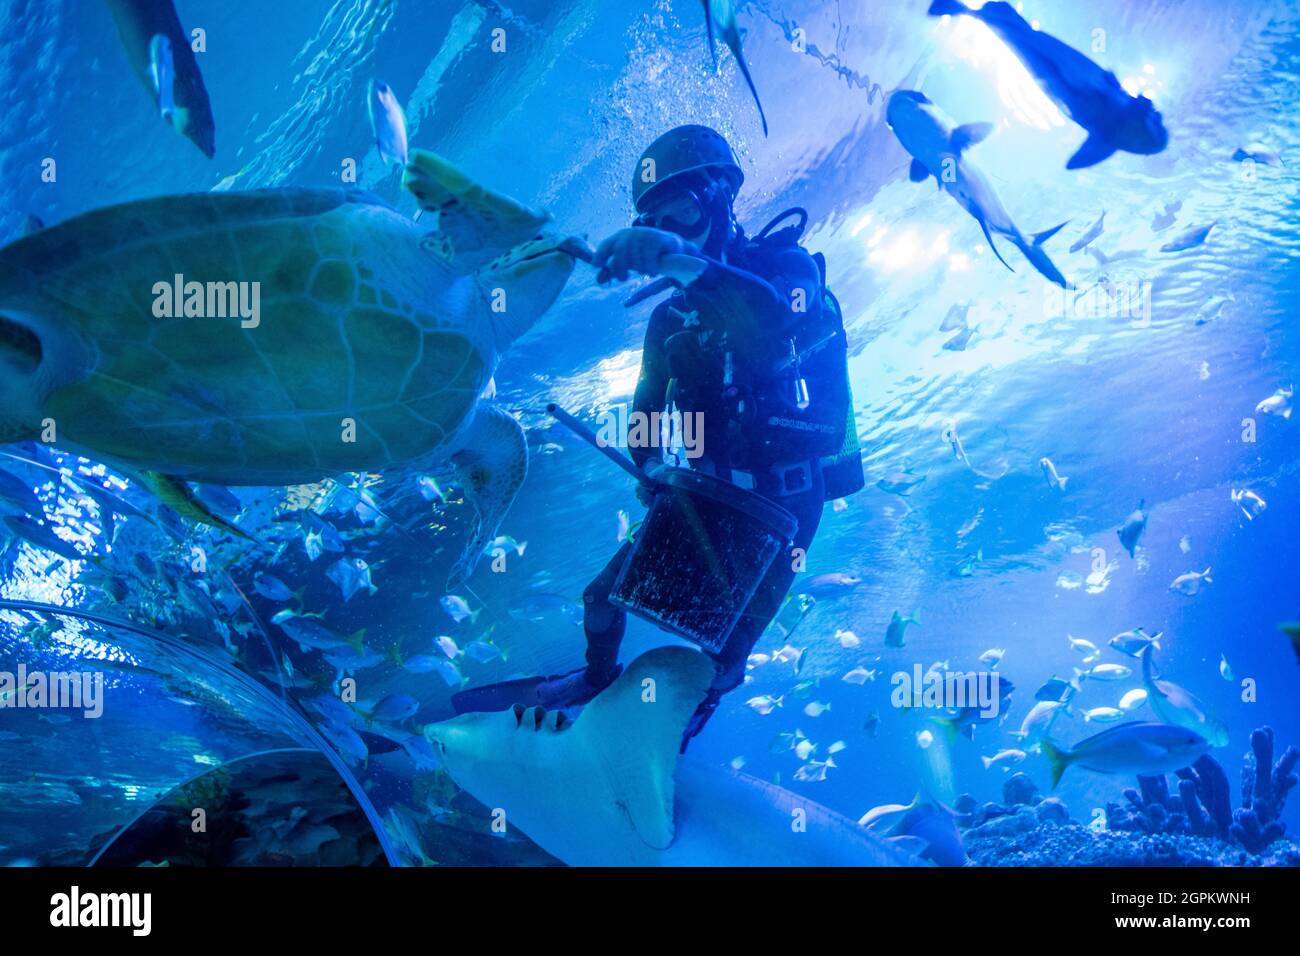 Kuala Lumpur, Malaysia. 29th Sep, 2021. A diver feeds a turtle at Aquaria KLCC in Kuala Lumpur, Malaysia, Sept. 29, 2021. Aquaria KLCC will be open for fully vaccinated visitors starting from Oct. 1. Credit: Chong Voon Chung/Xinhua/Alamy Live News Stock Photo